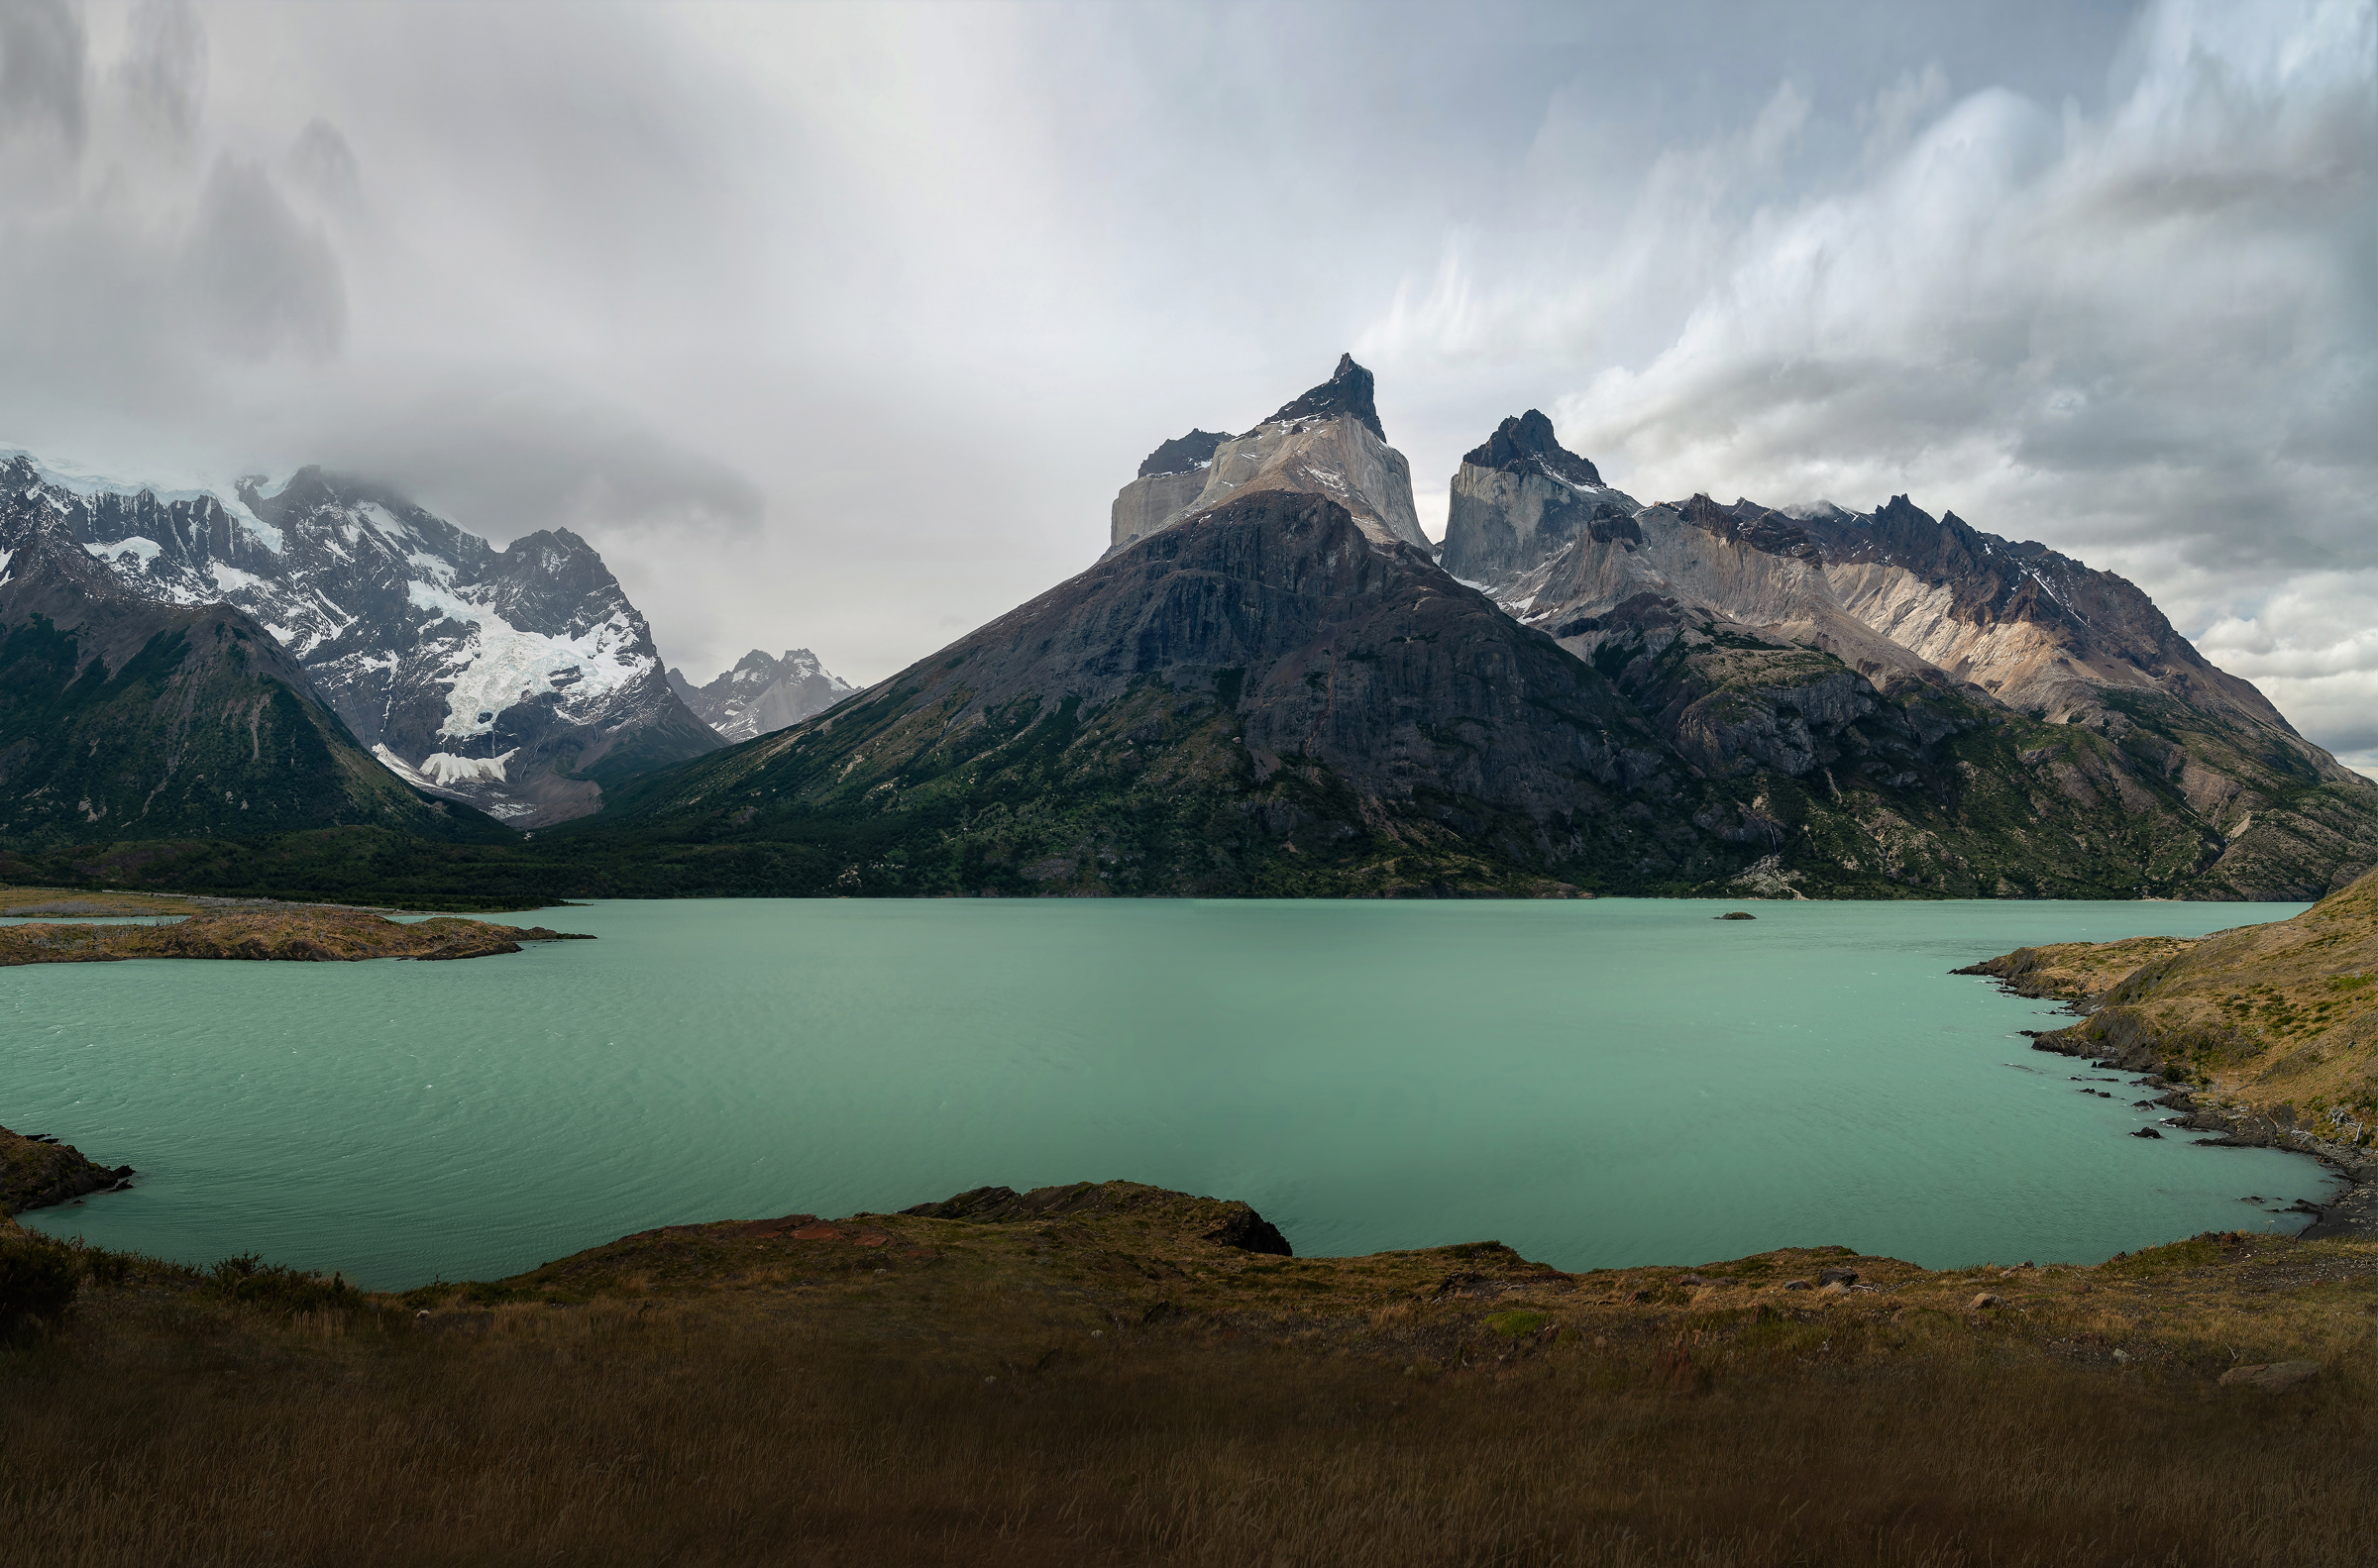  Hiking the Torres del Paine O-Circuit